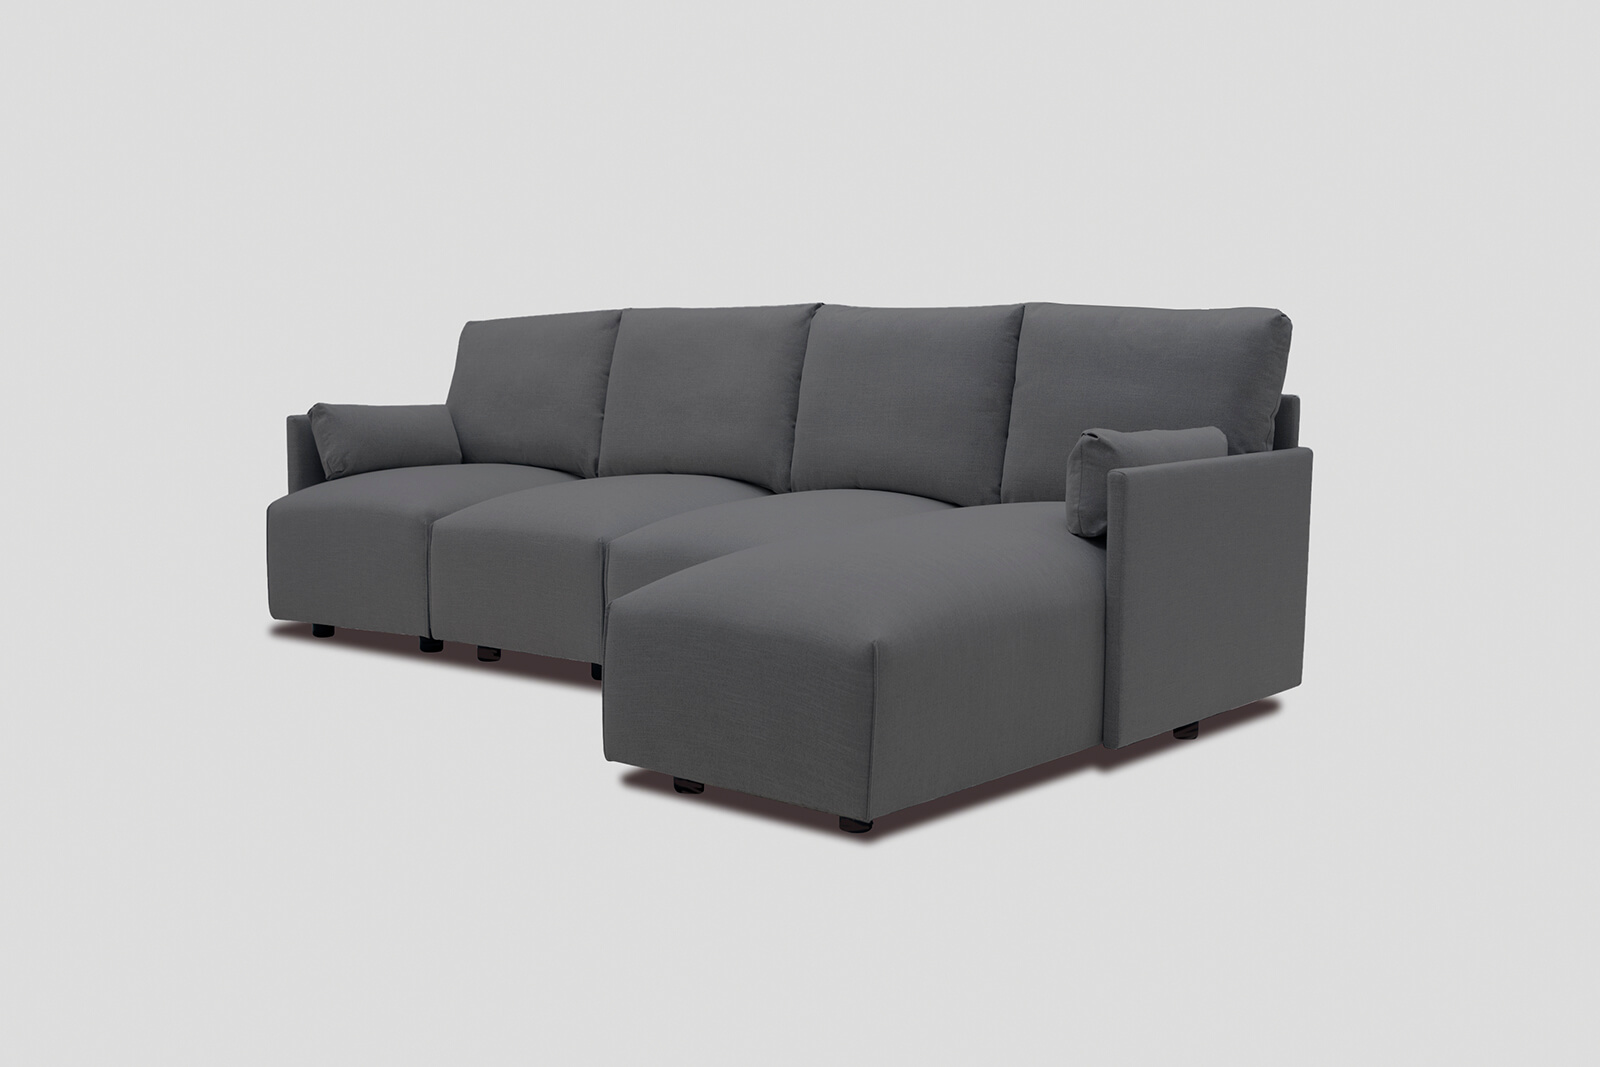 HB04-large-chaise-sofa-seal-3q-right